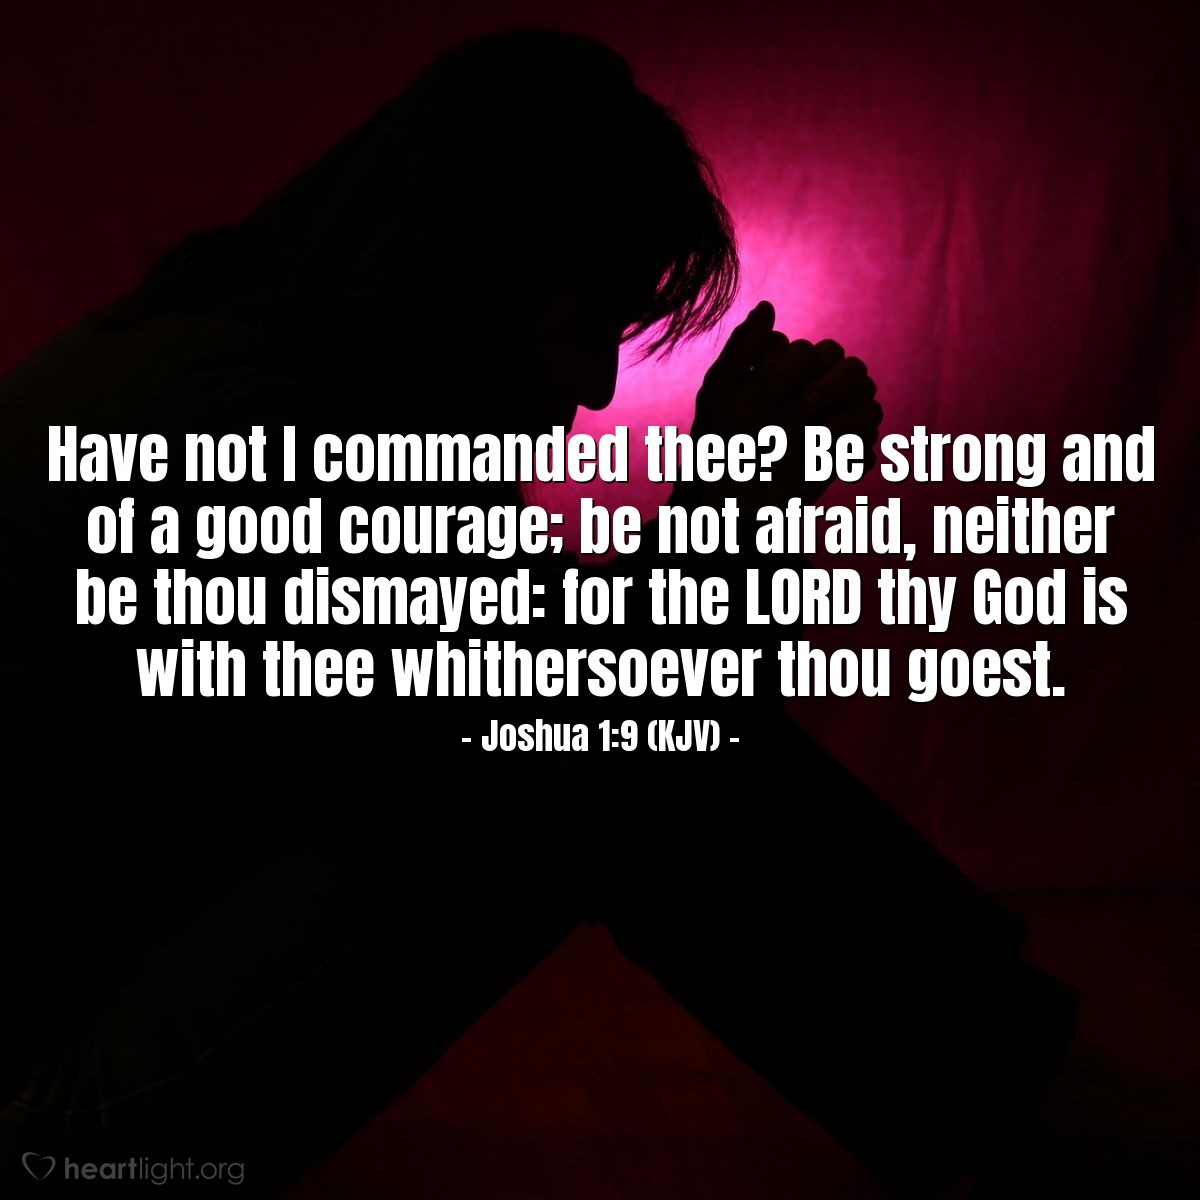 Illustration of Joshua 1:9 (KJV) — Have not I commanded thee? Be strong and of a good courage; be not afraid, neither be thou dismayed: for the Lord thy God is with thee whithersoever thou goest.